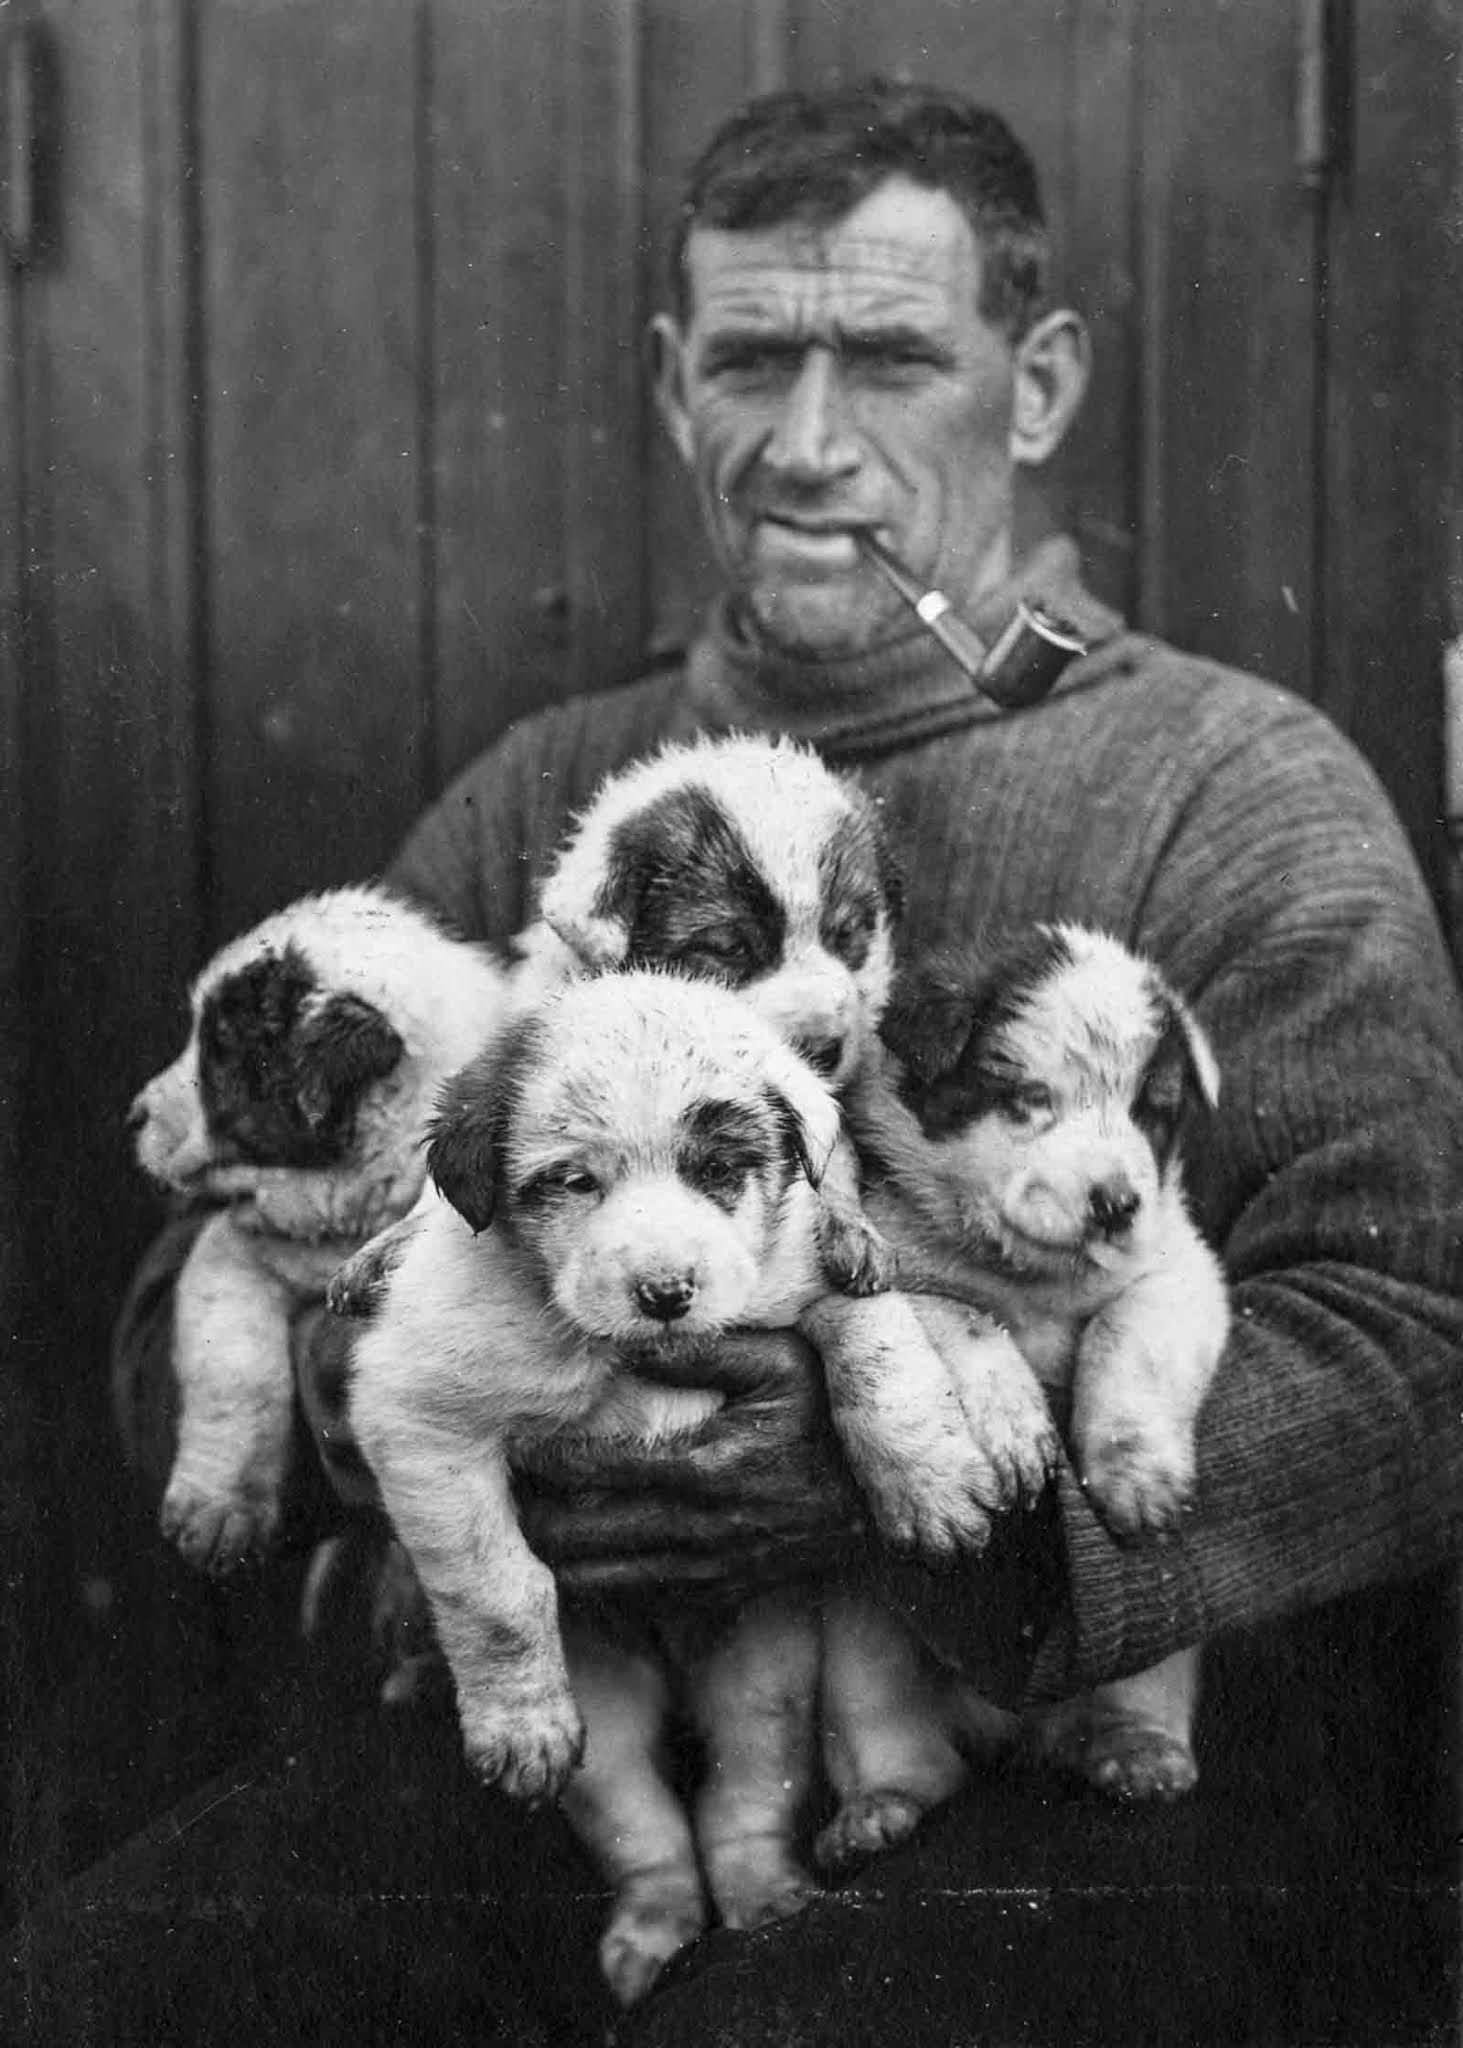 Second Officer Tom Crean with sled dog puppies.